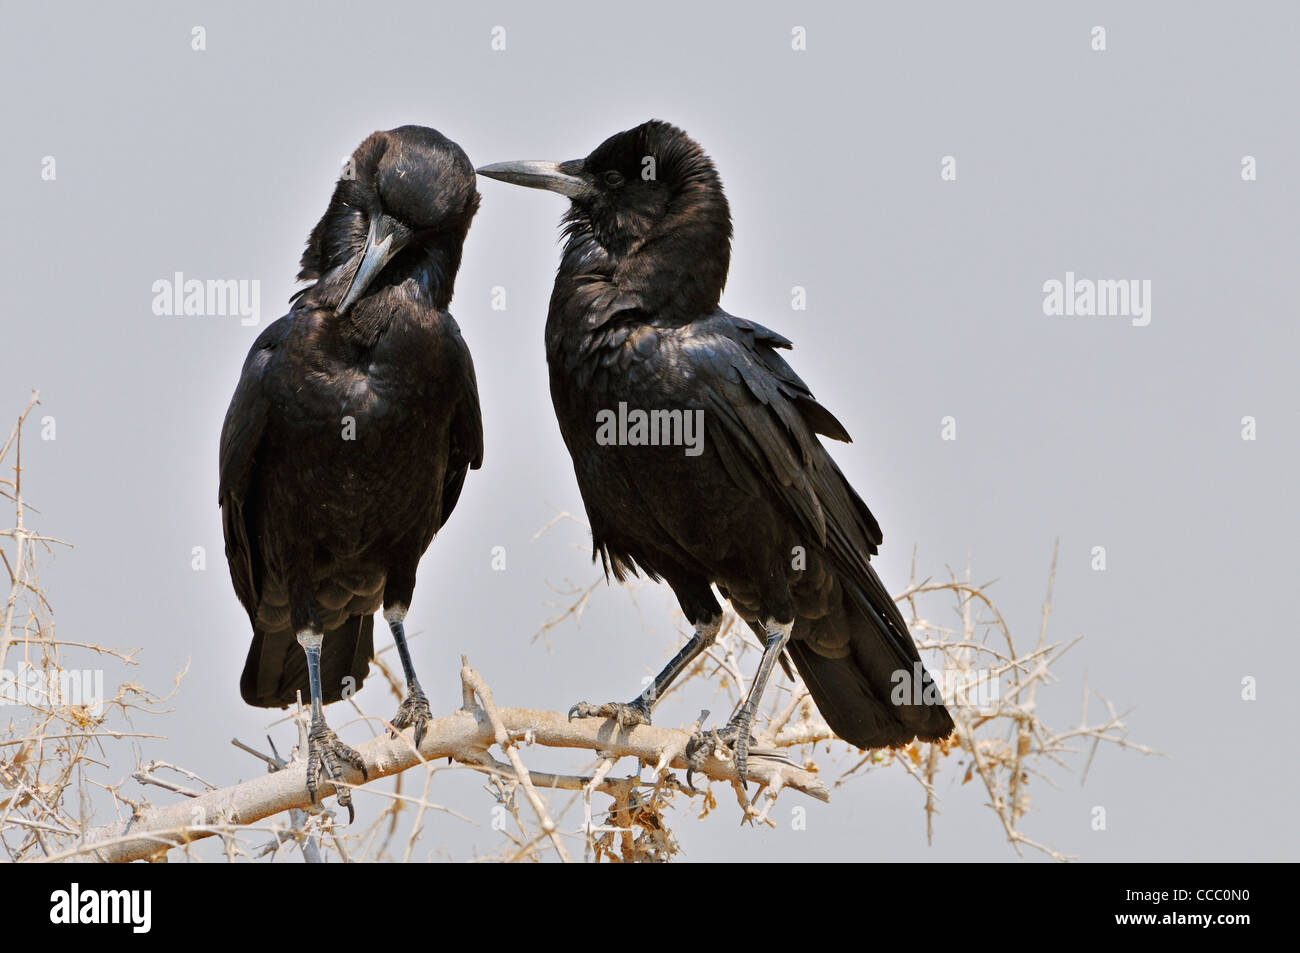 Two Cape Crows / Black crows (Corvus capensis) grooming, Etosha National Park, Namibia Stock Photo